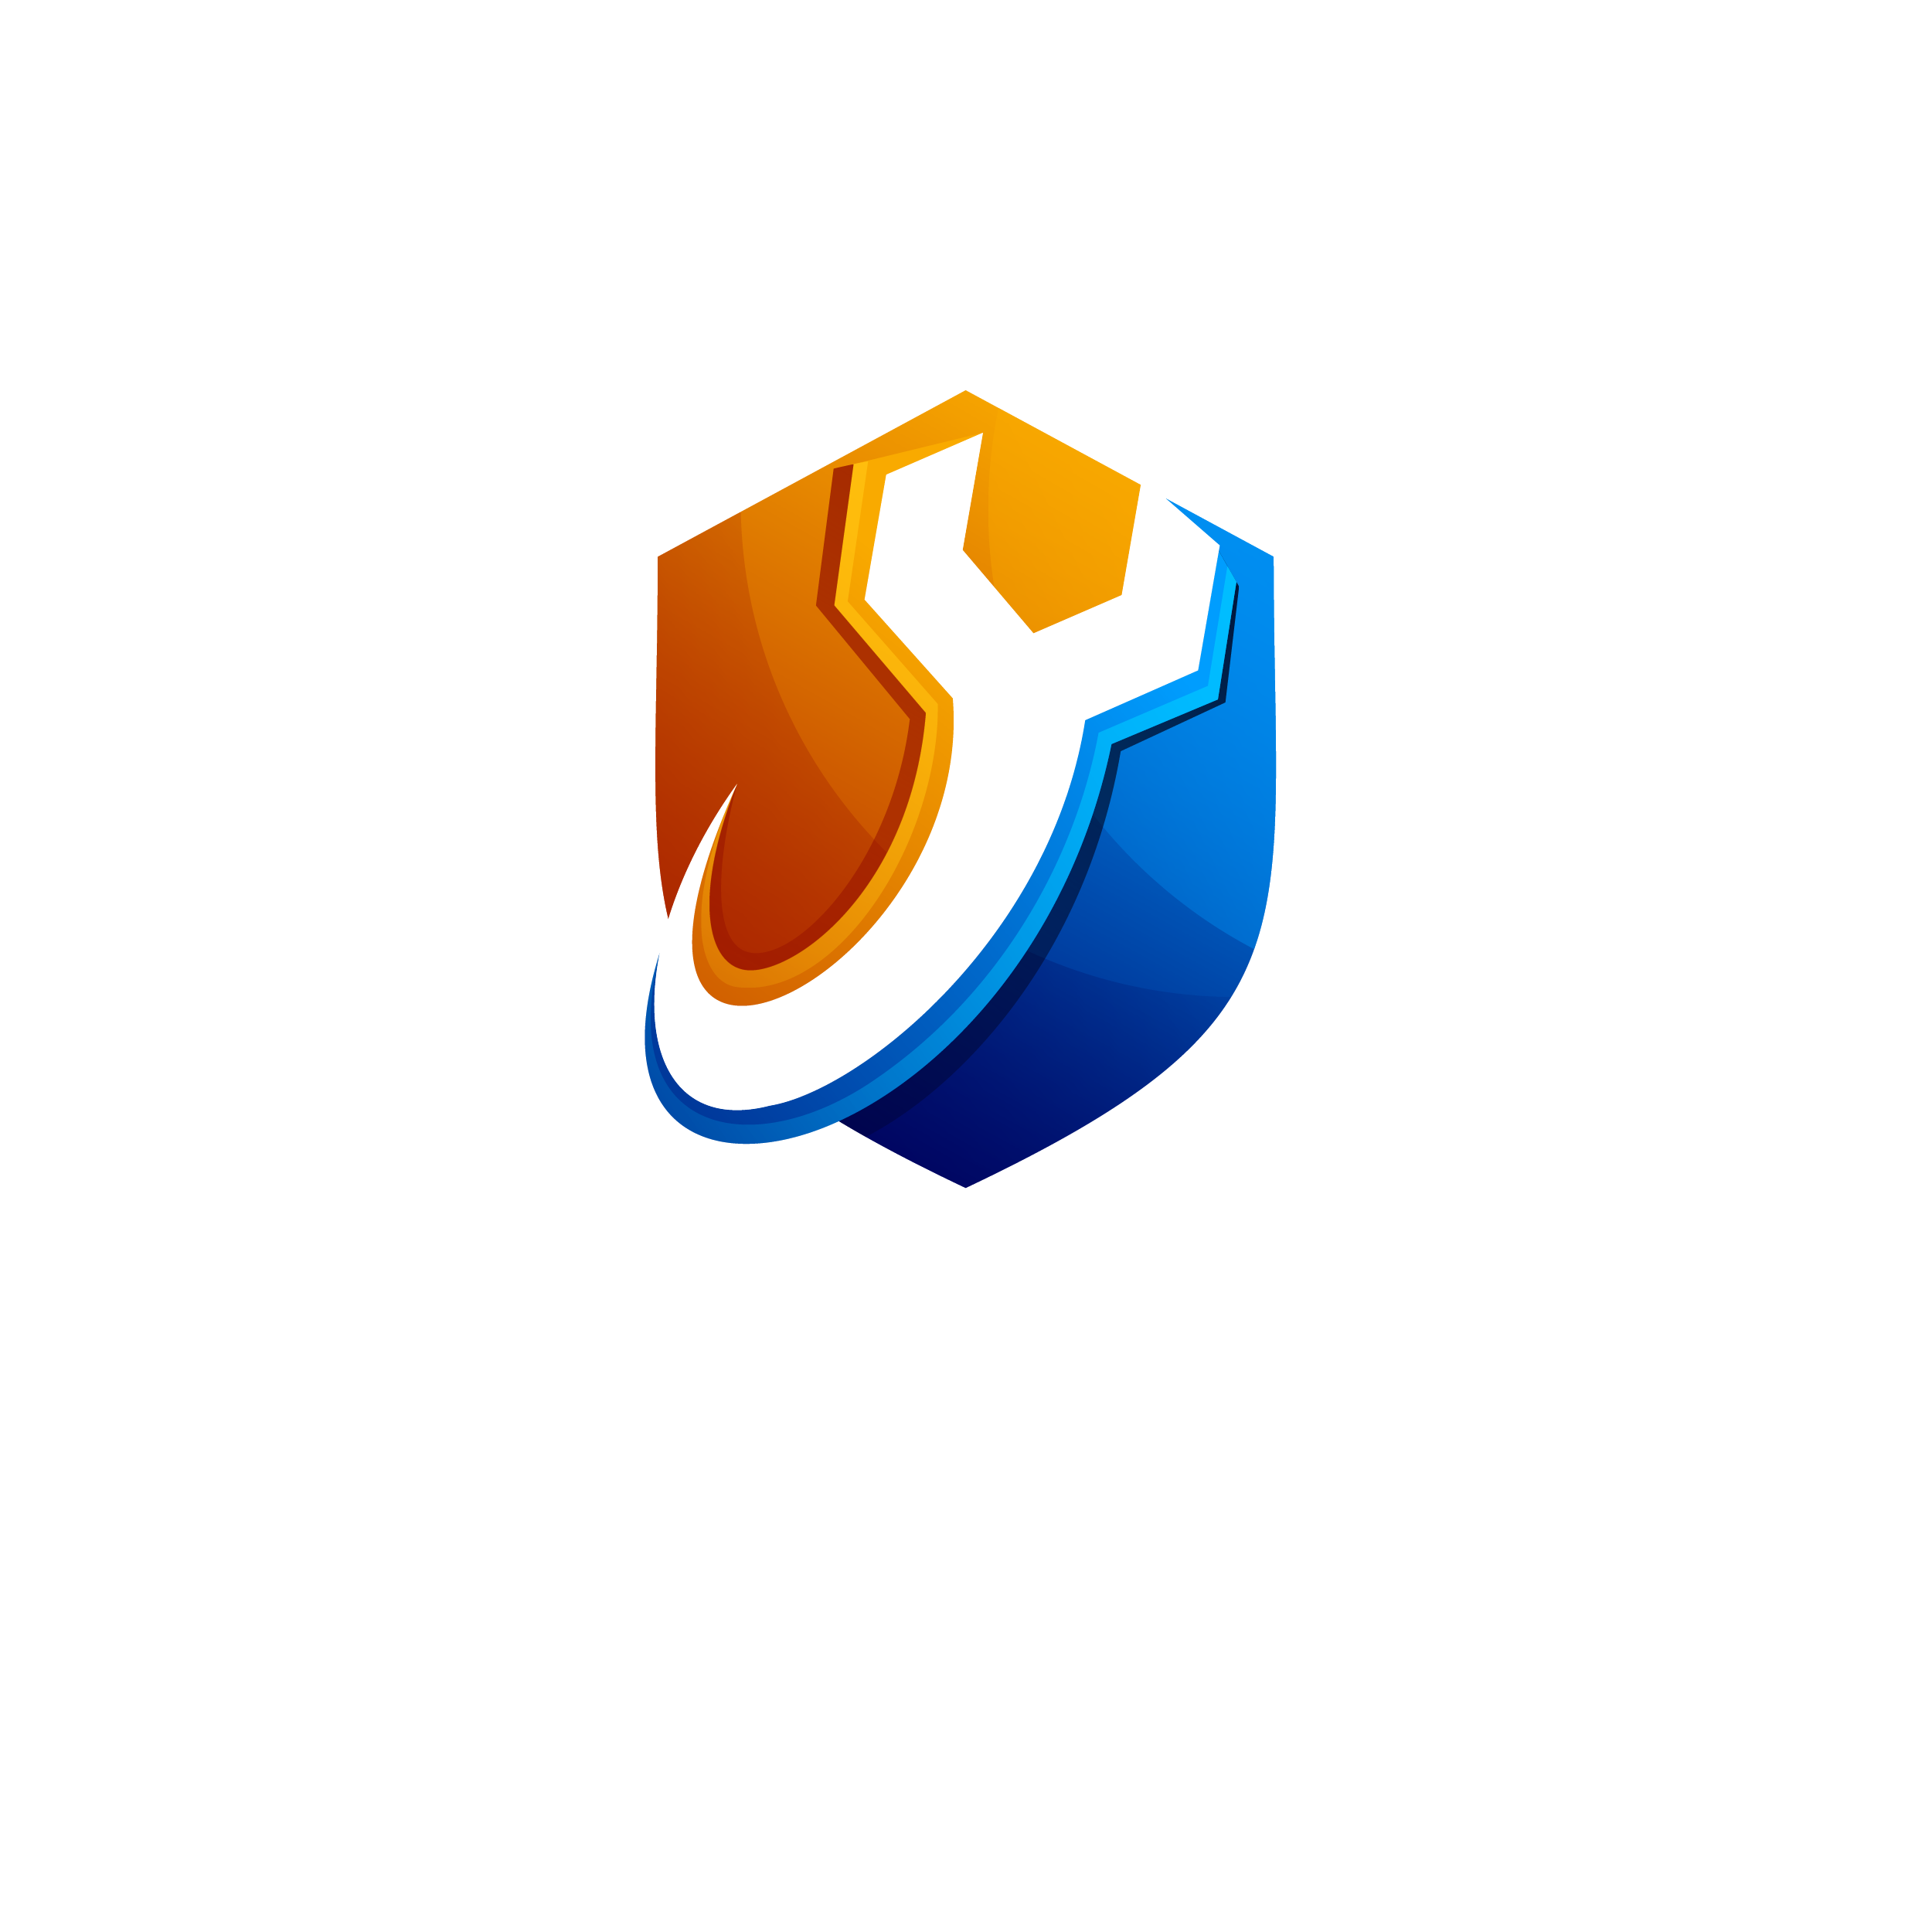 C. Areal Estate Journal